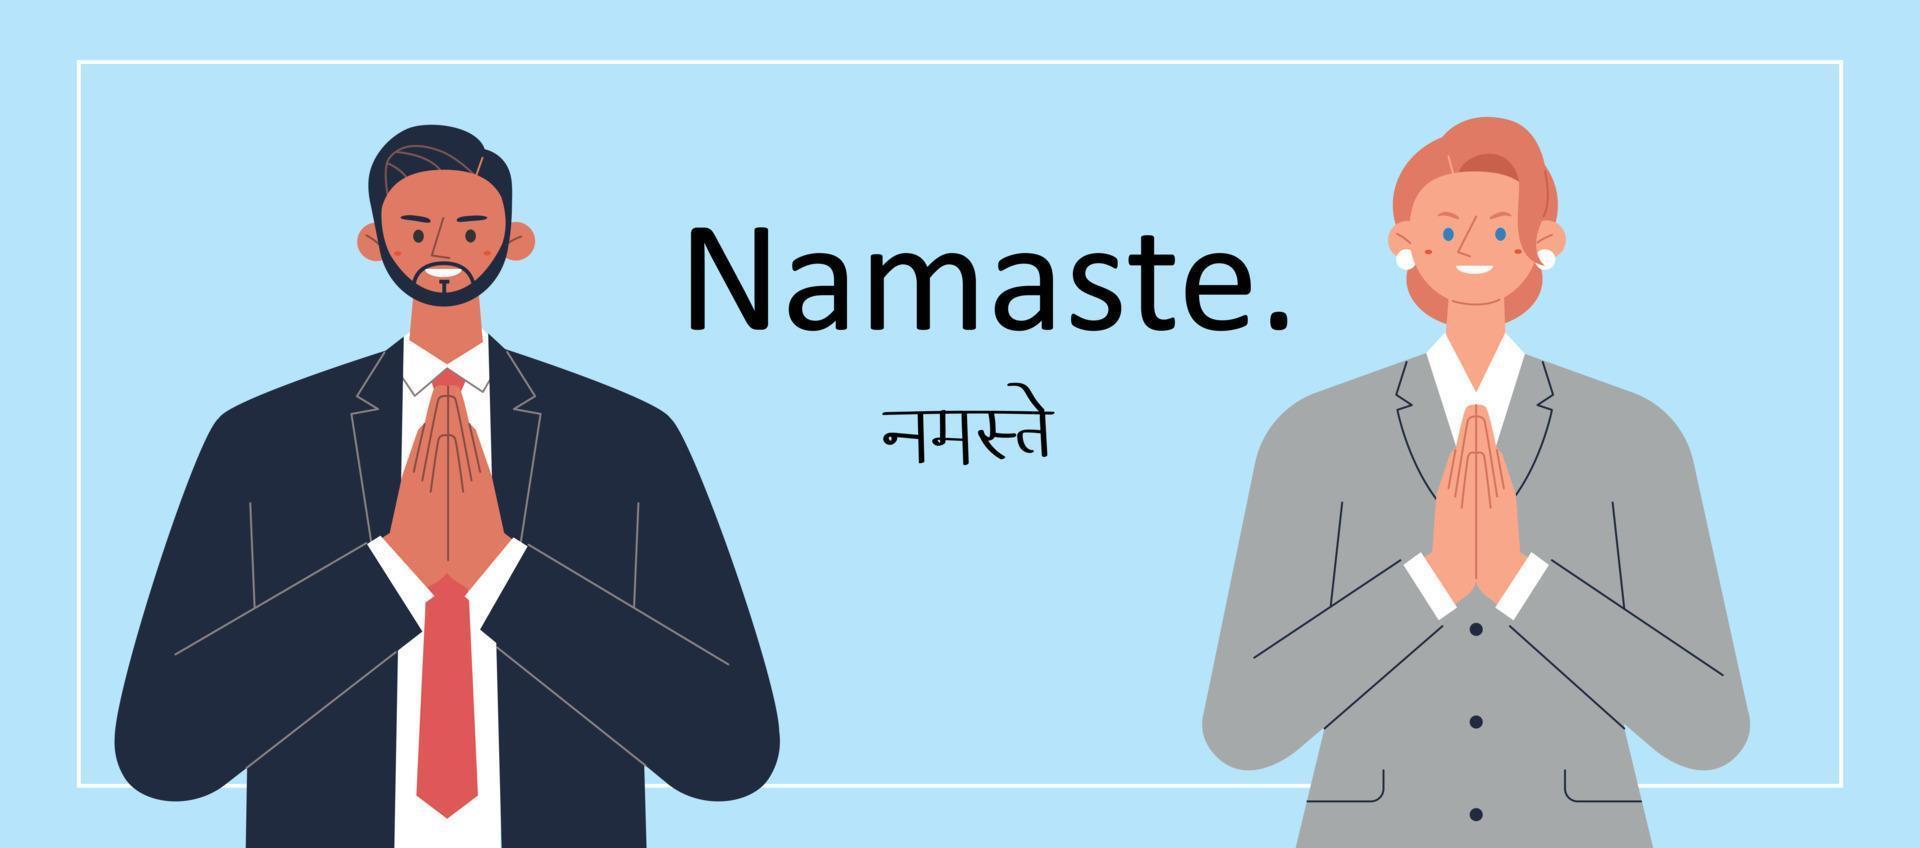 A businessman and a business woman are holding hands and giving an Indian greeting. vector